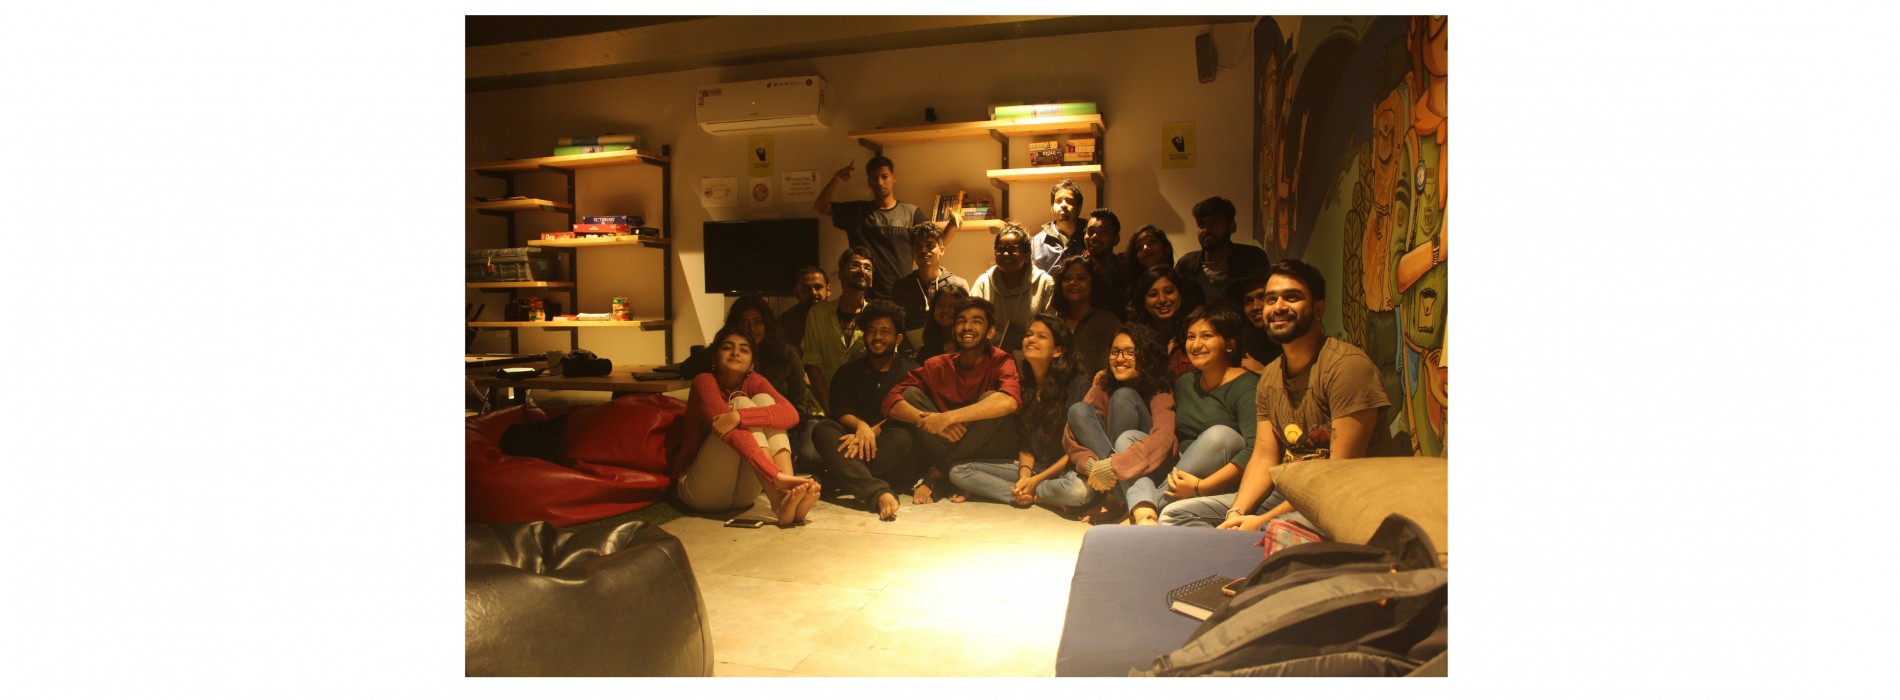 Art Getaway held in Panchgani by Platform for Artists in association with Zostel